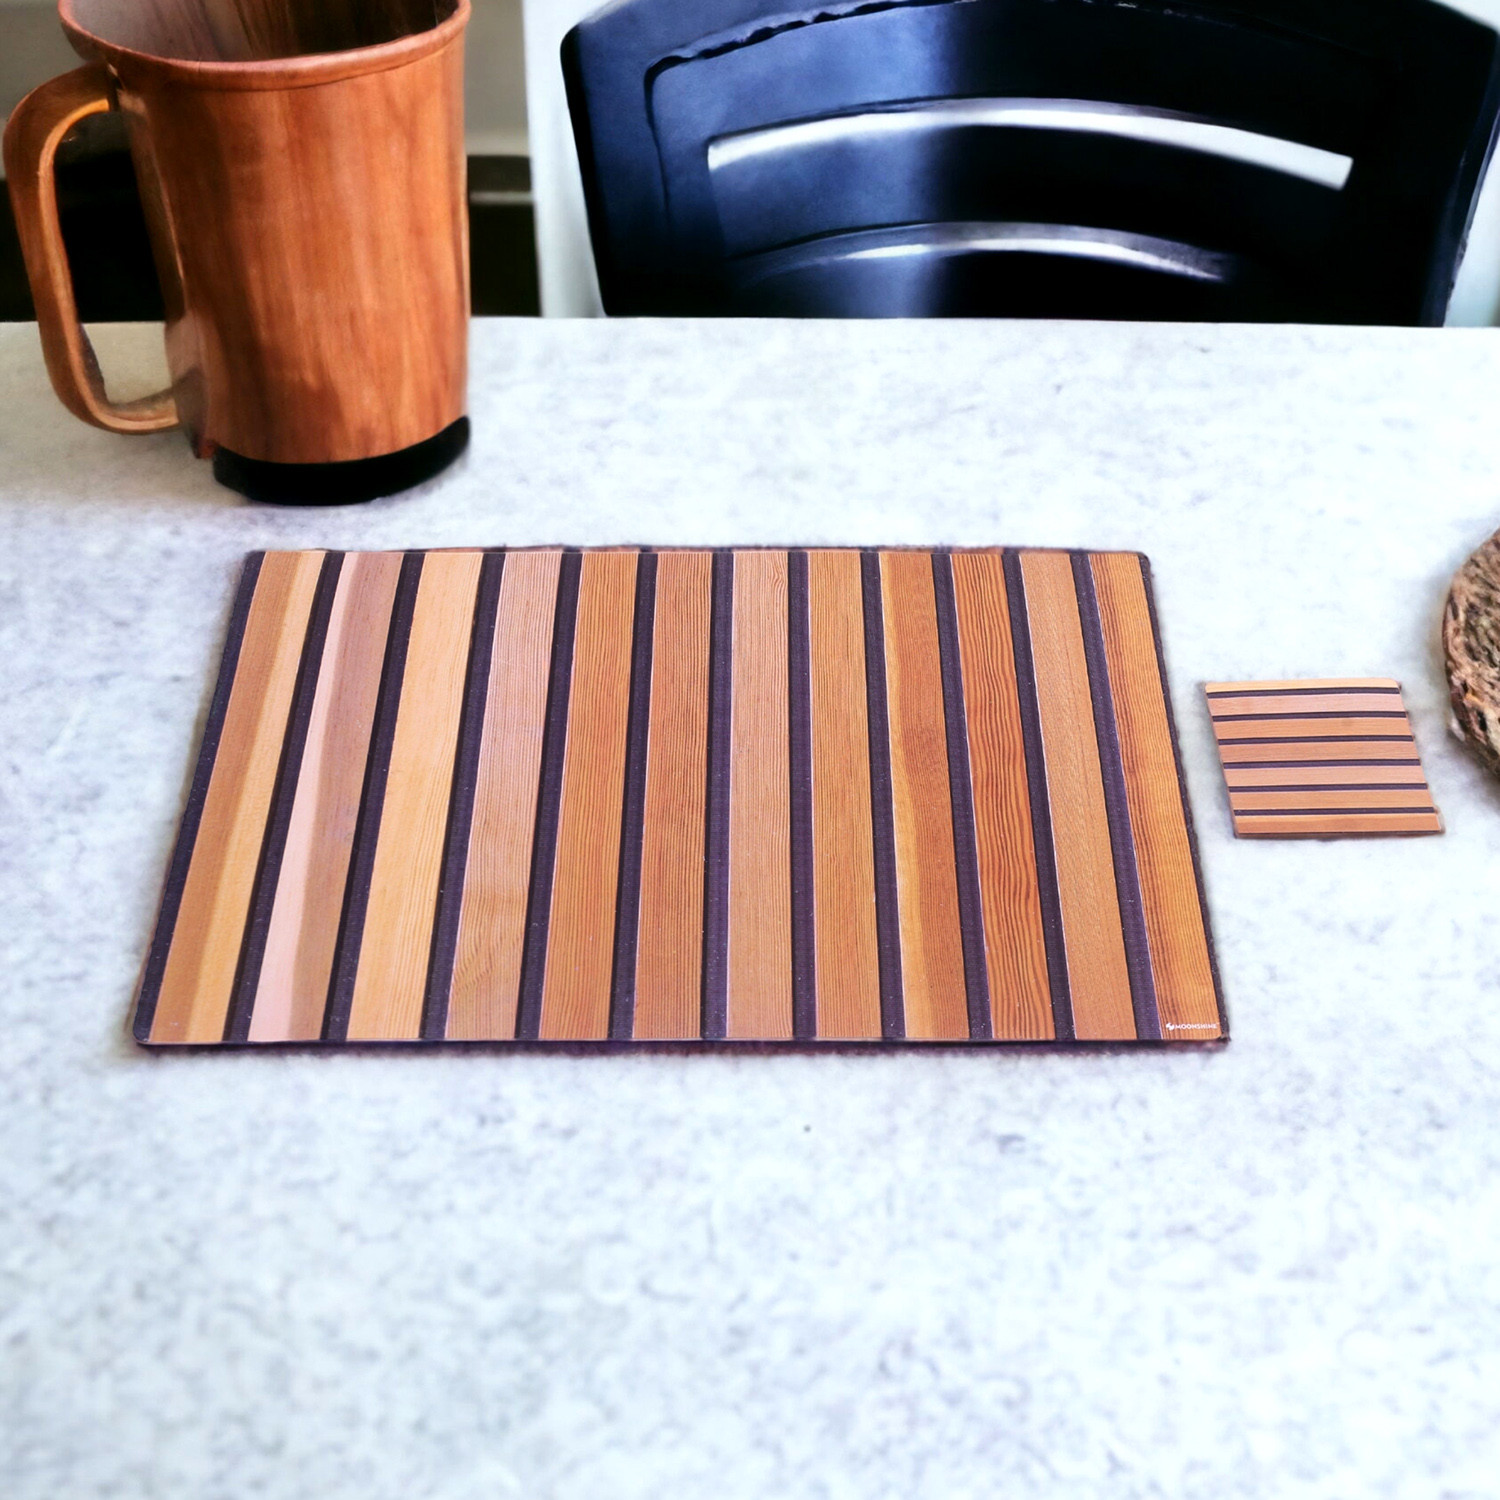 Kuber Industries Placemat | Table Placemats with Coasters | Table Placemats with Tea Coasters | Dining Table Placemats & Coasters Set | Lining Placemat | 12 Piece Set | Wooden